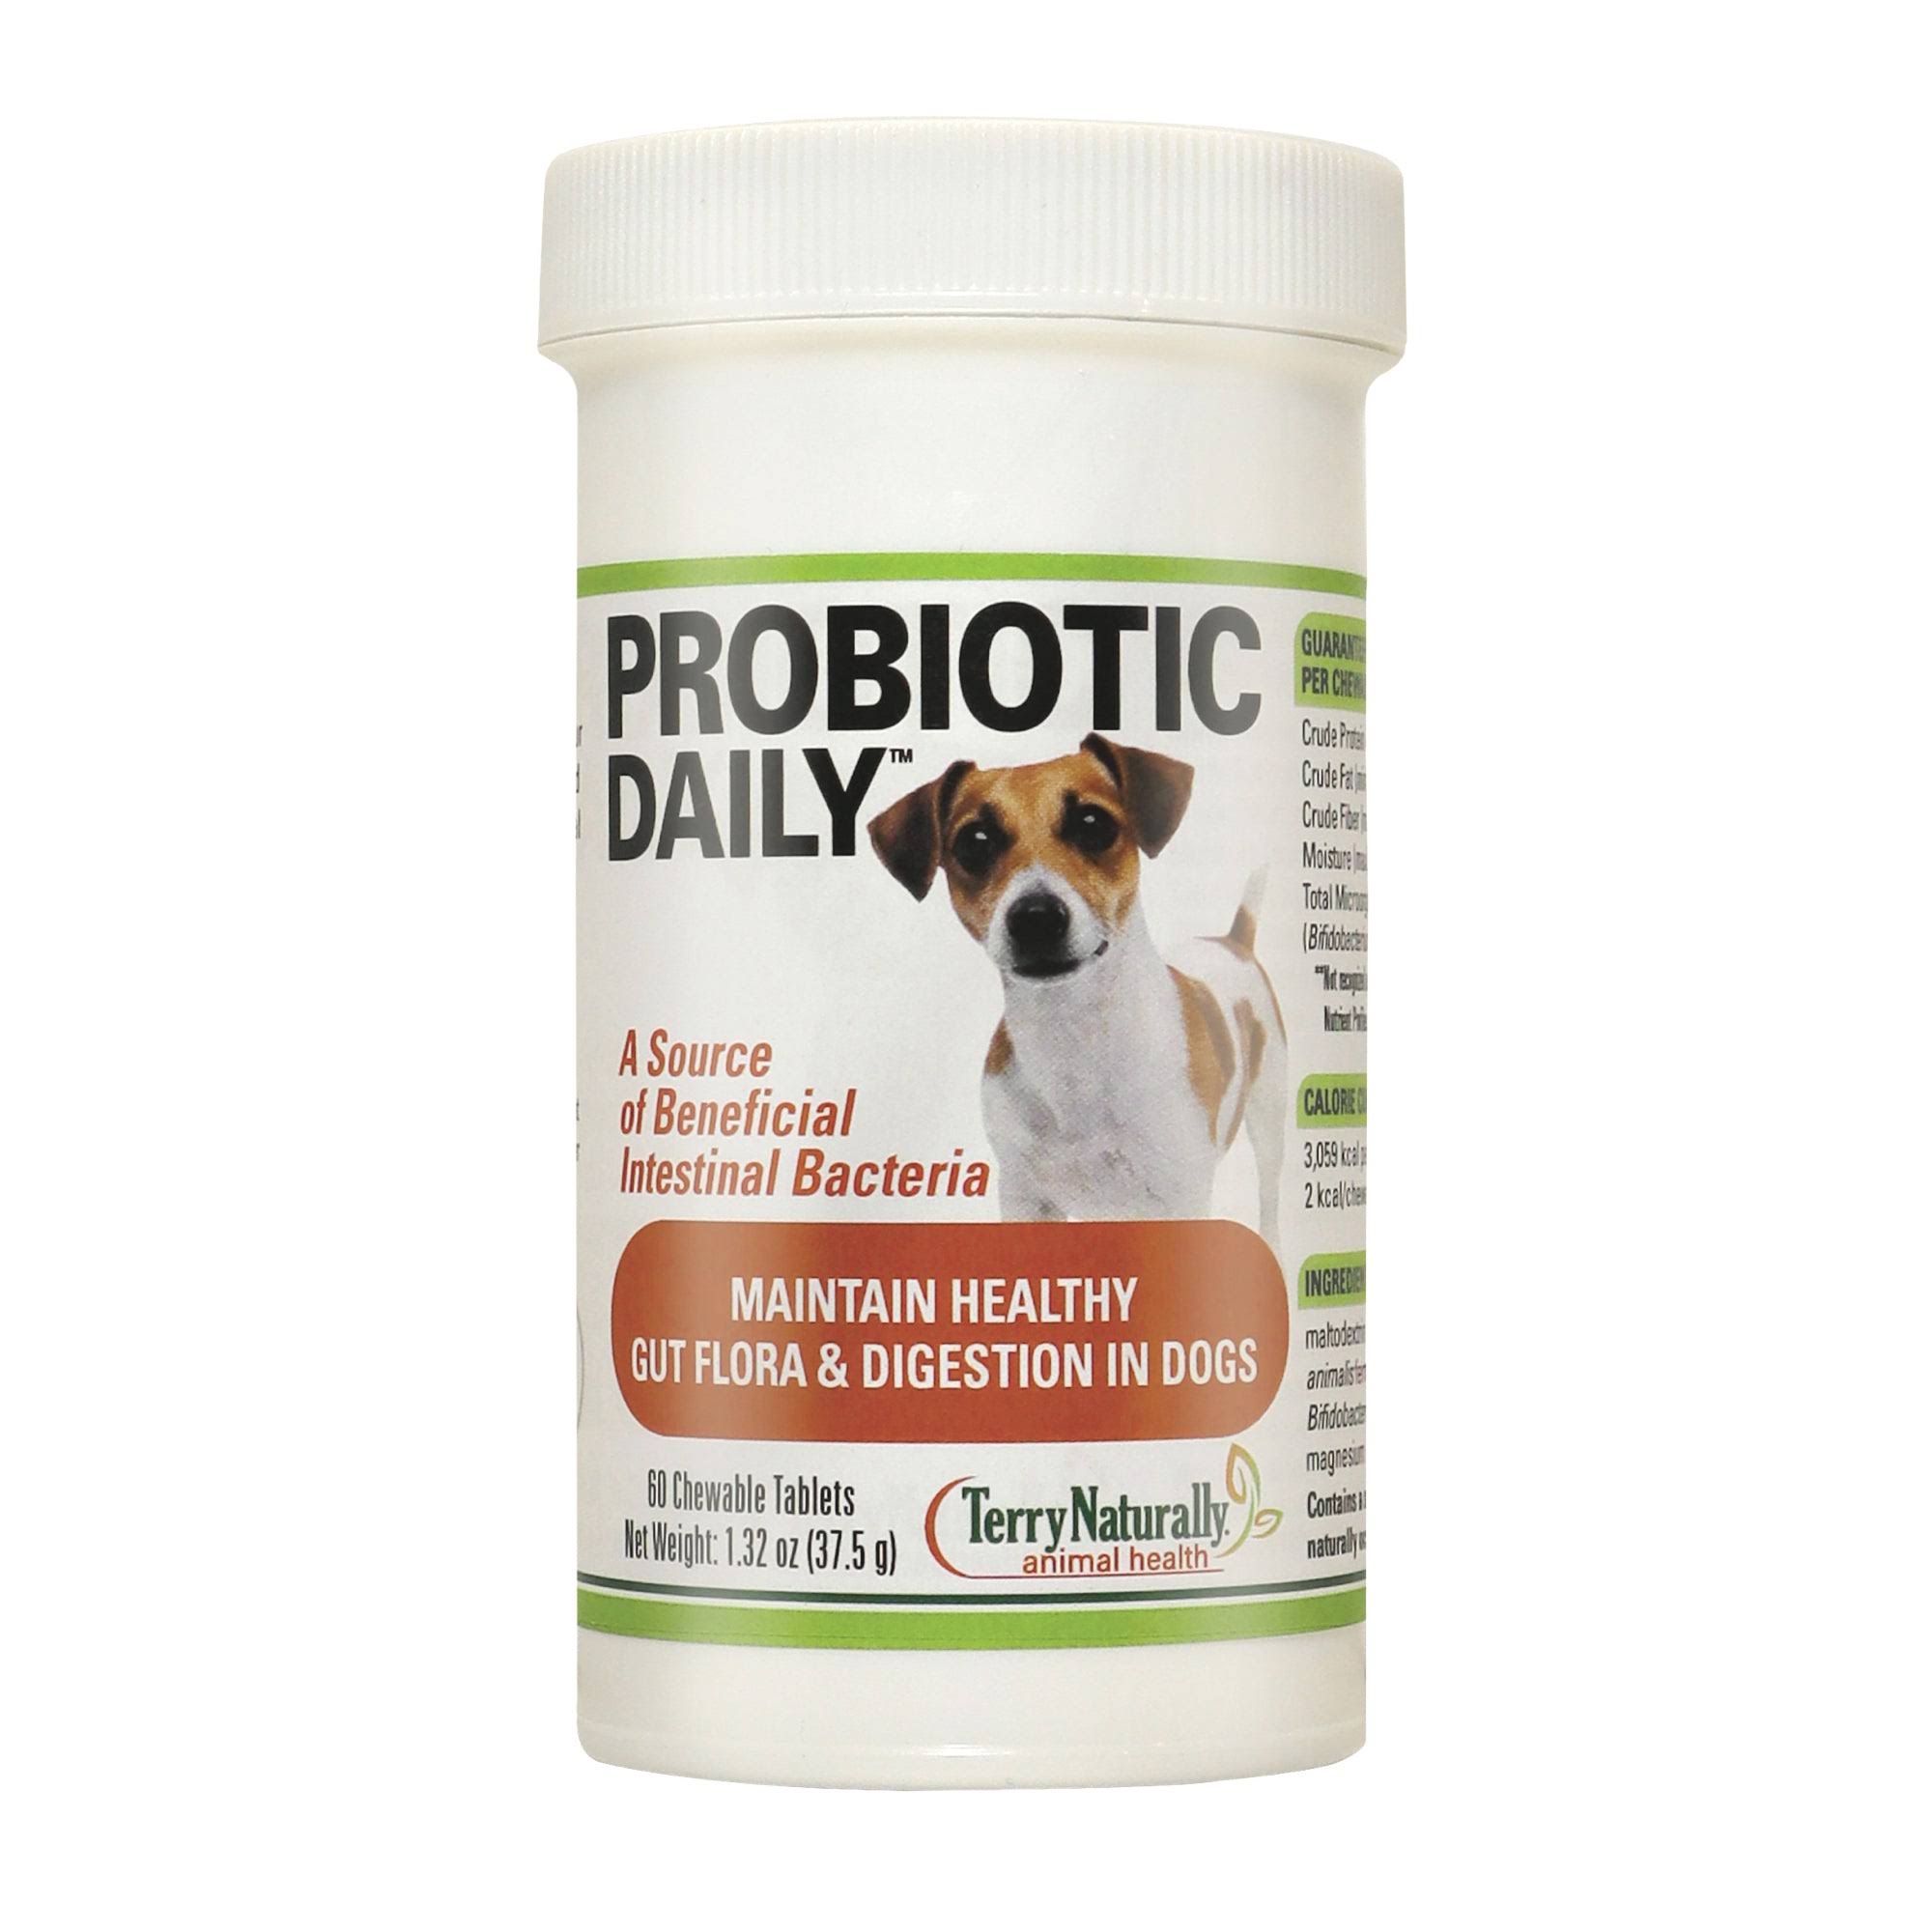 Terry Naturally Probiotic Daily